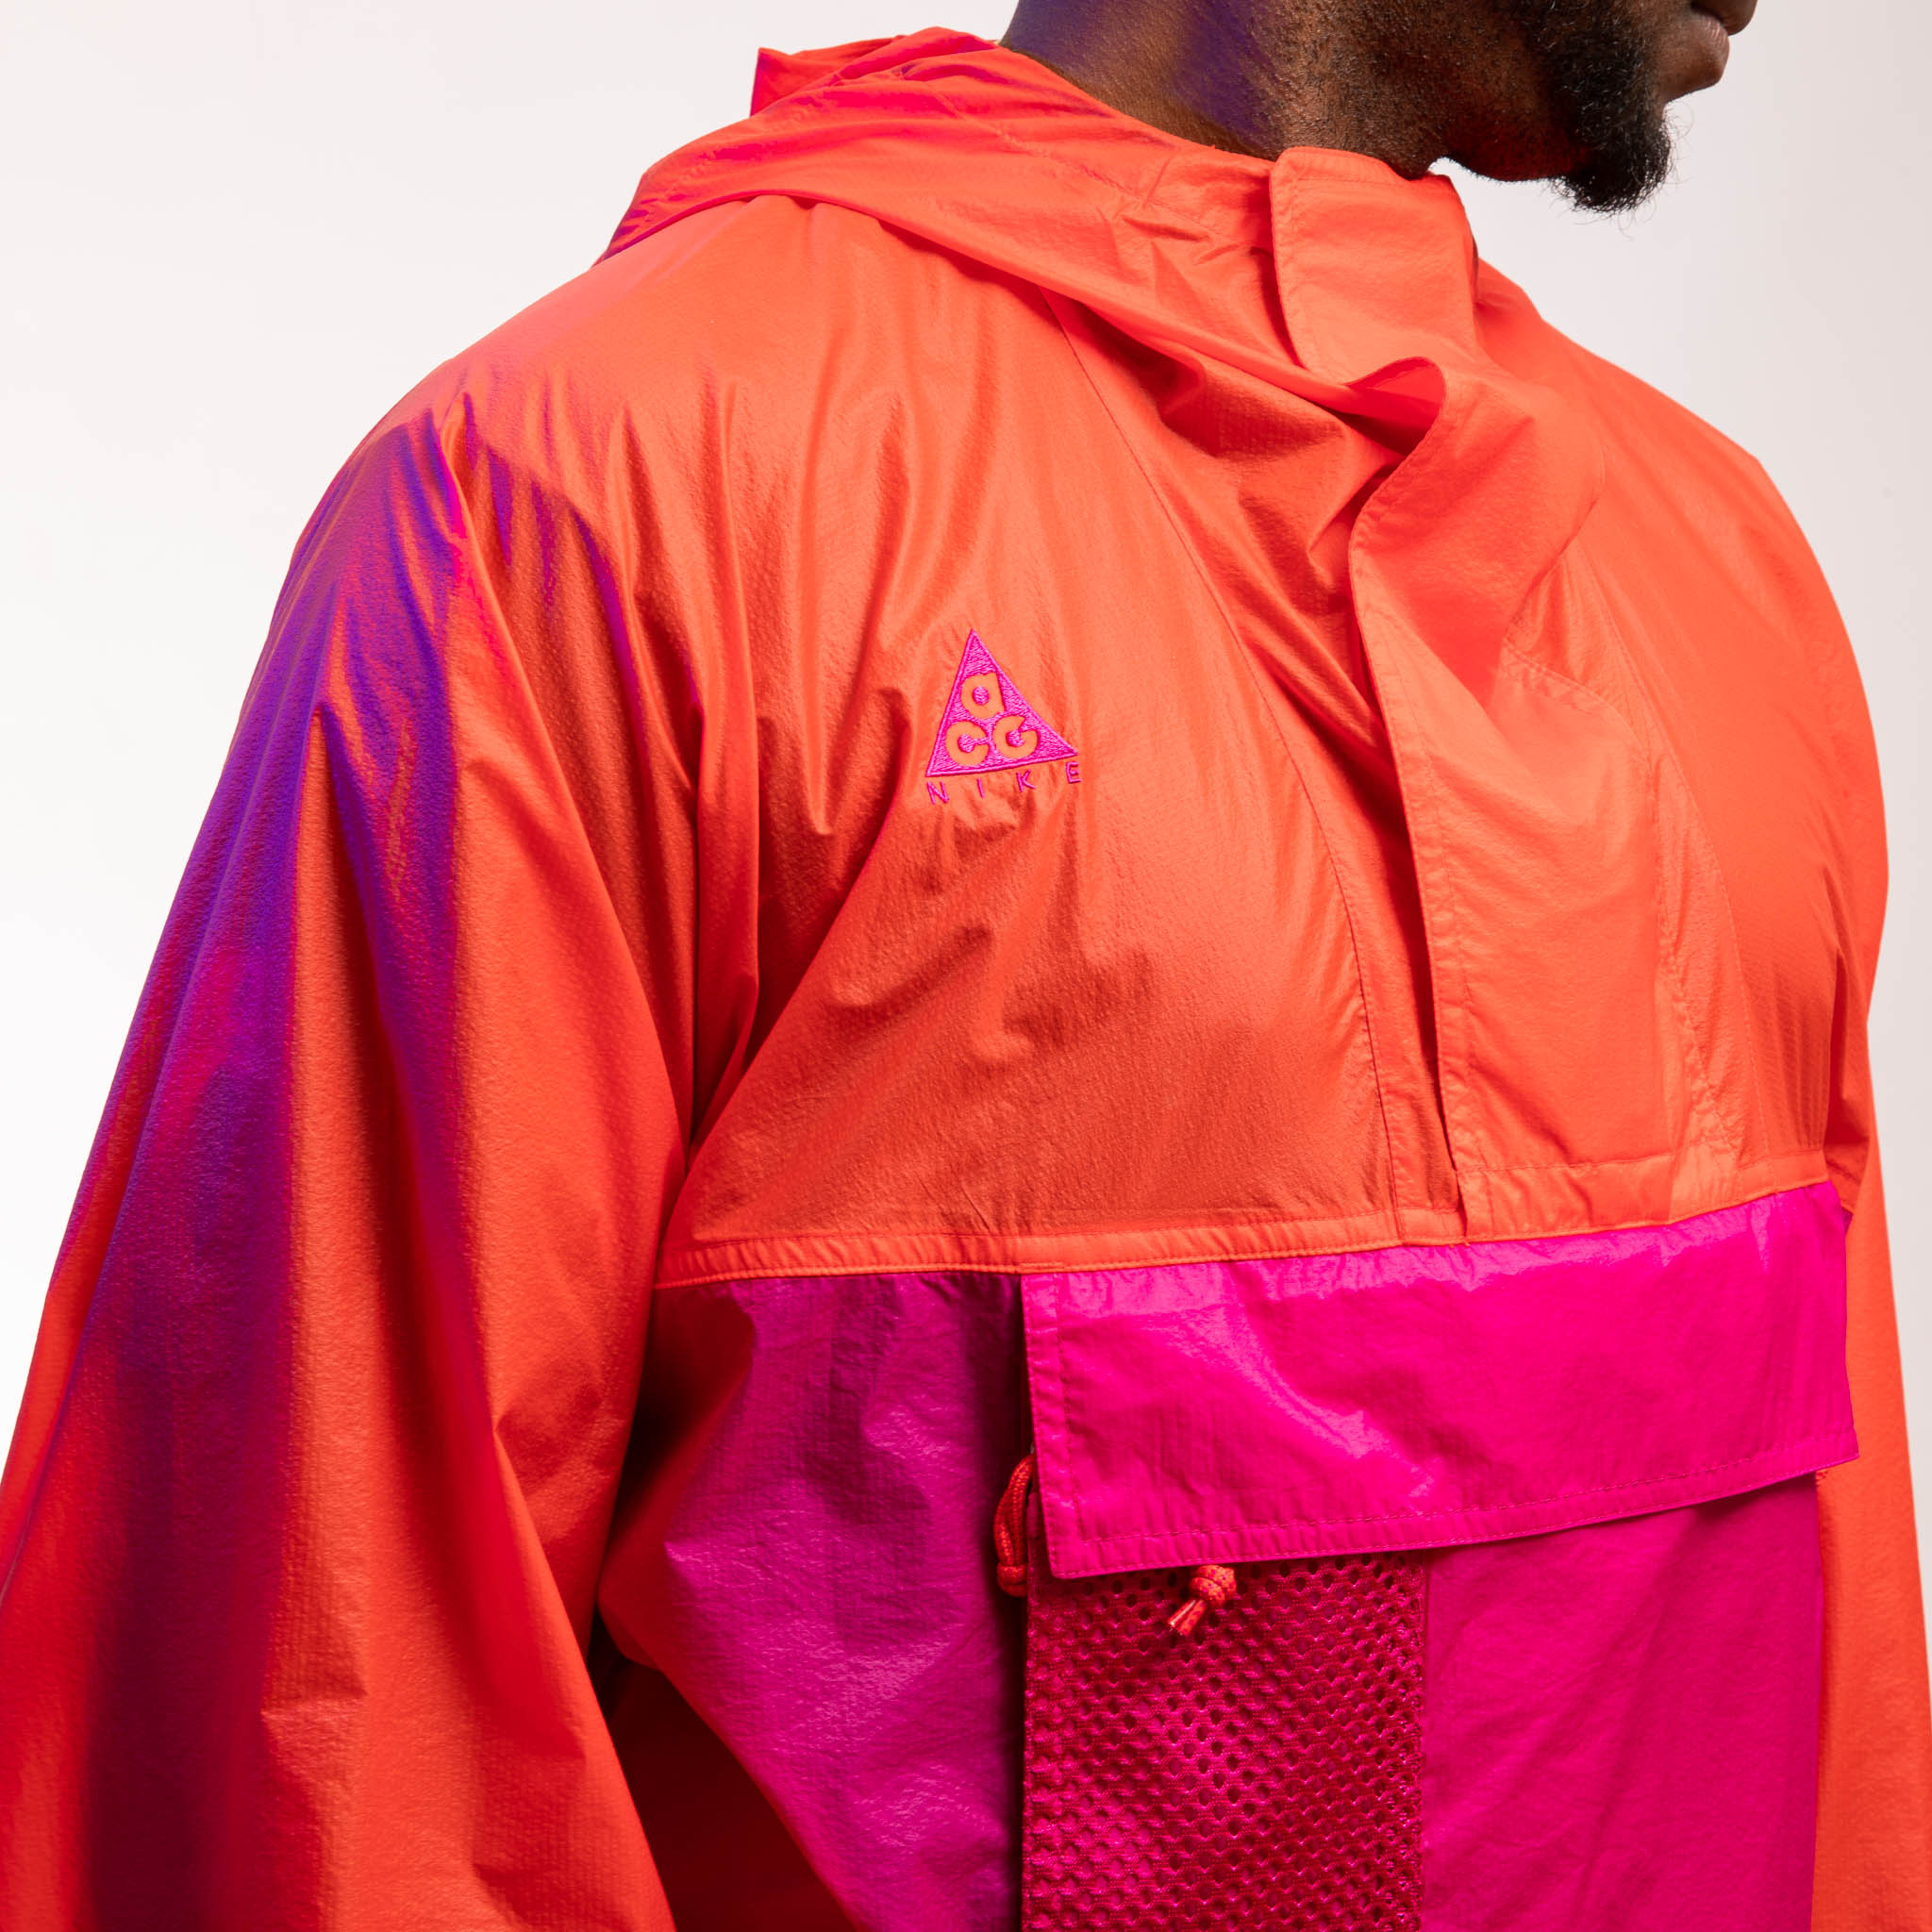 Titolo Twitter: "Nike ACG Fall Winter 2019 collection is set to release on Friday, 9th August 9AM CET ➡️ https://t.co/dgdJq3AxUH image showing 📷 Nike ACG Anorak and Woven Shorts